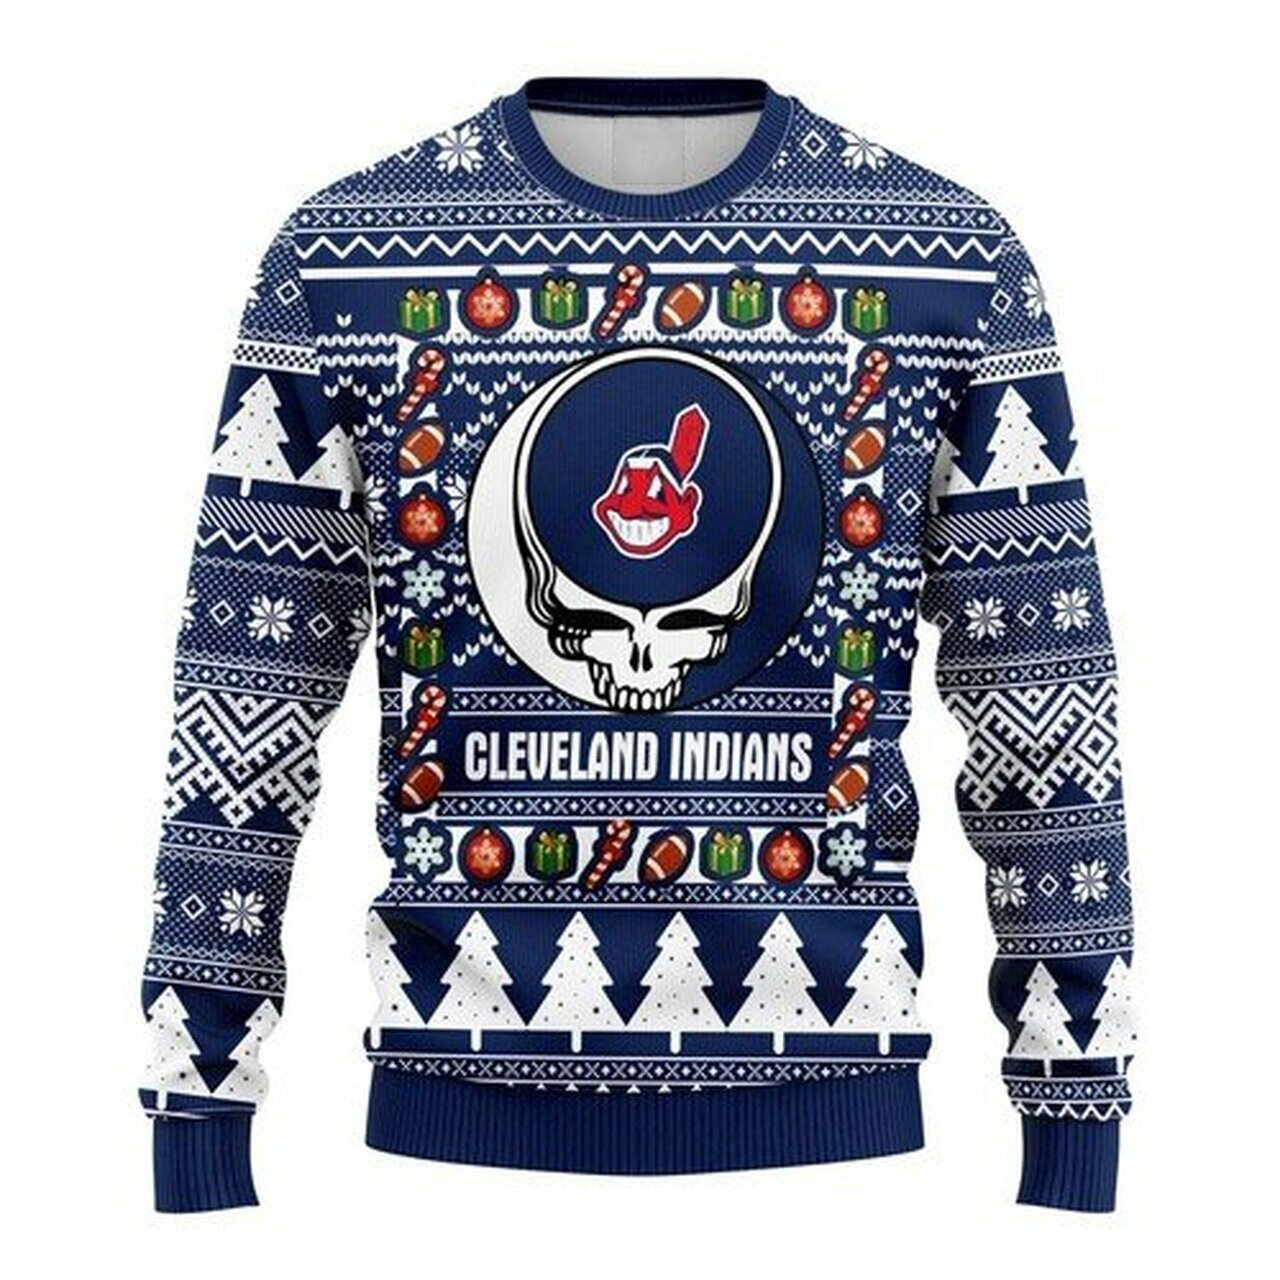 MLB Cleveland Indians Grateful Dead ugly christmas sweater